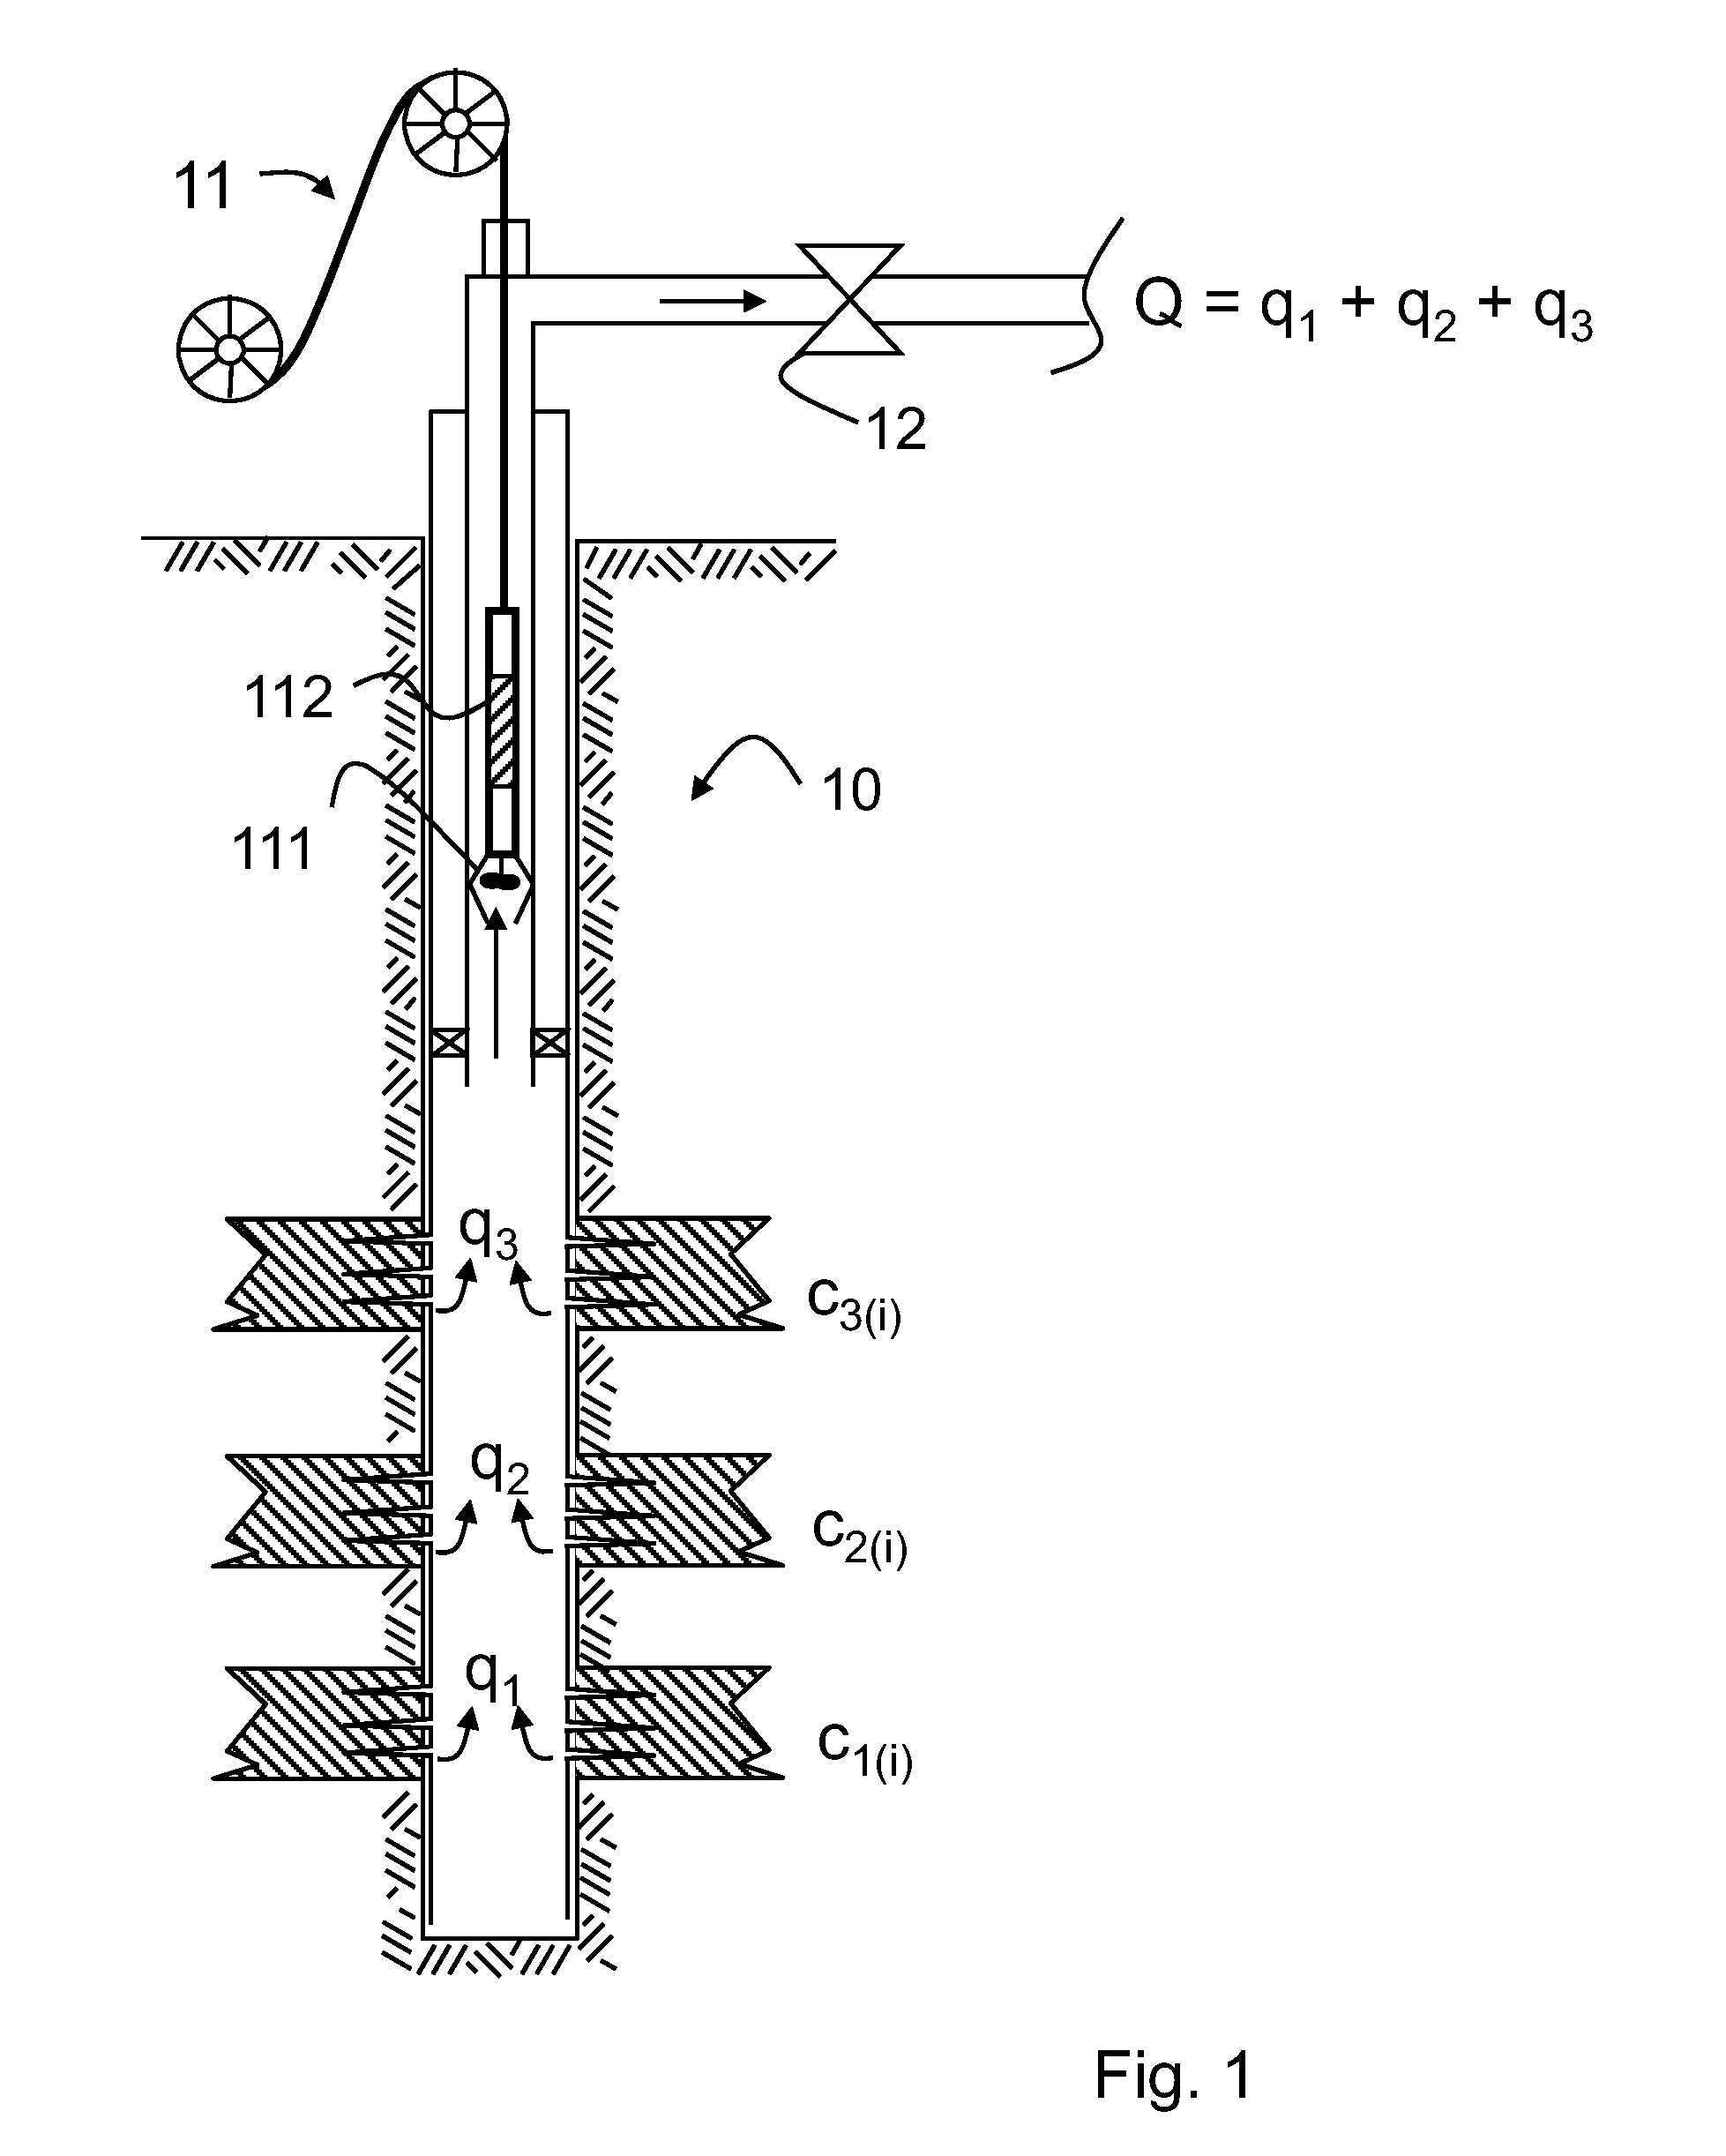 Method of determining end member concentrations